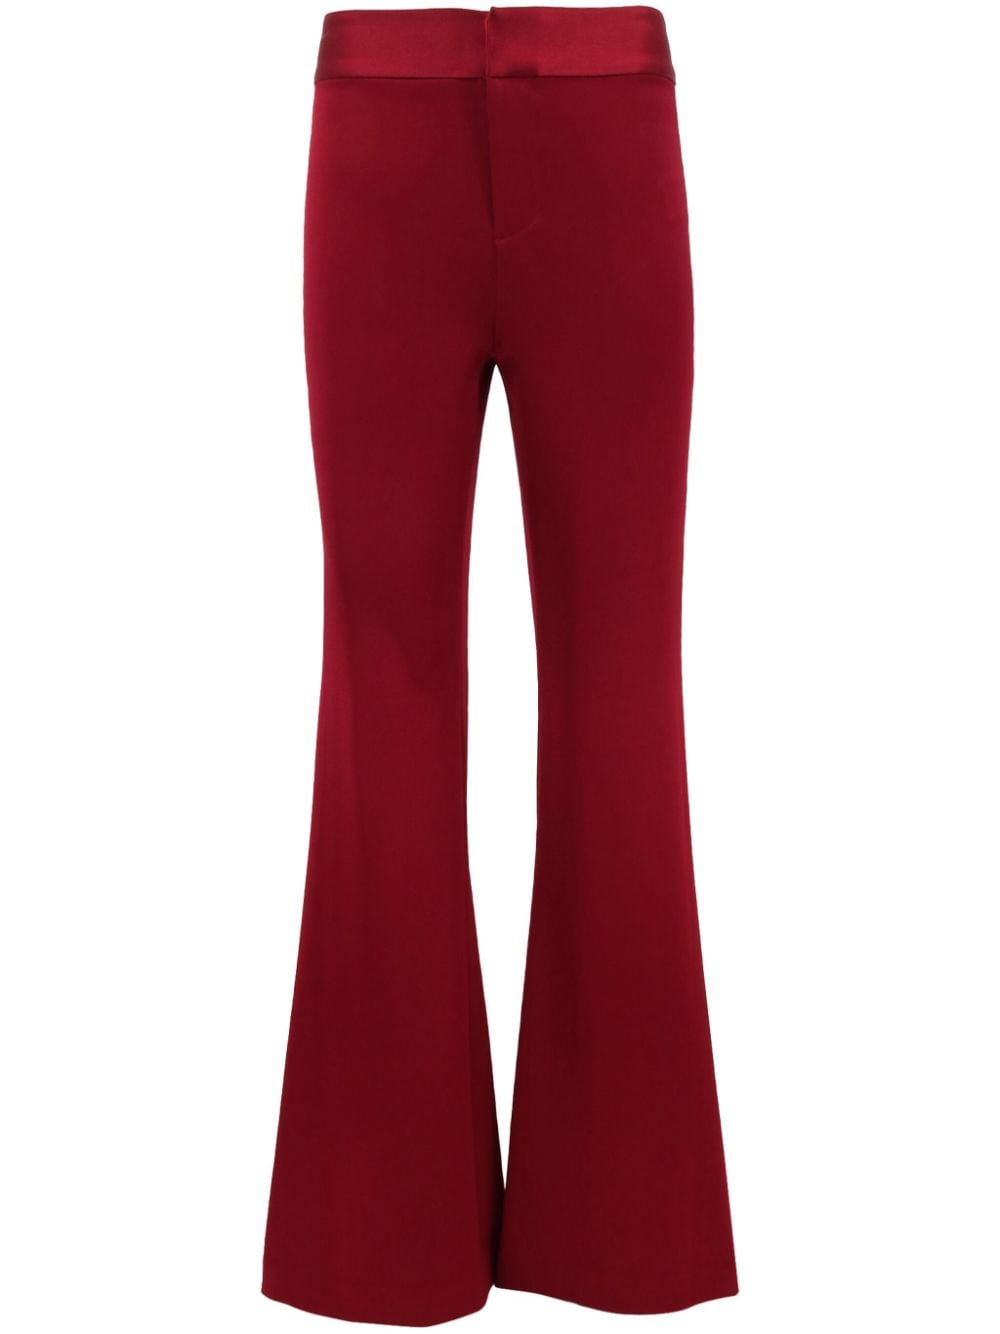 alice + olivia Deanna bootcut trousers - Red von alice + olivia